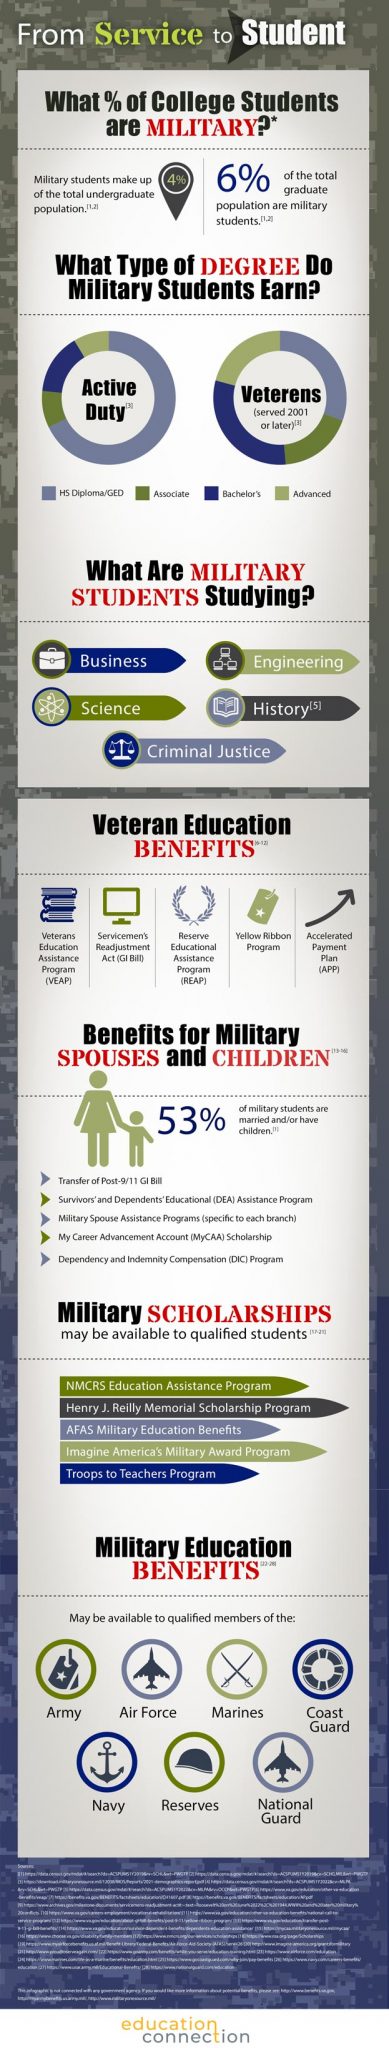 Infographic Overview of Military Students